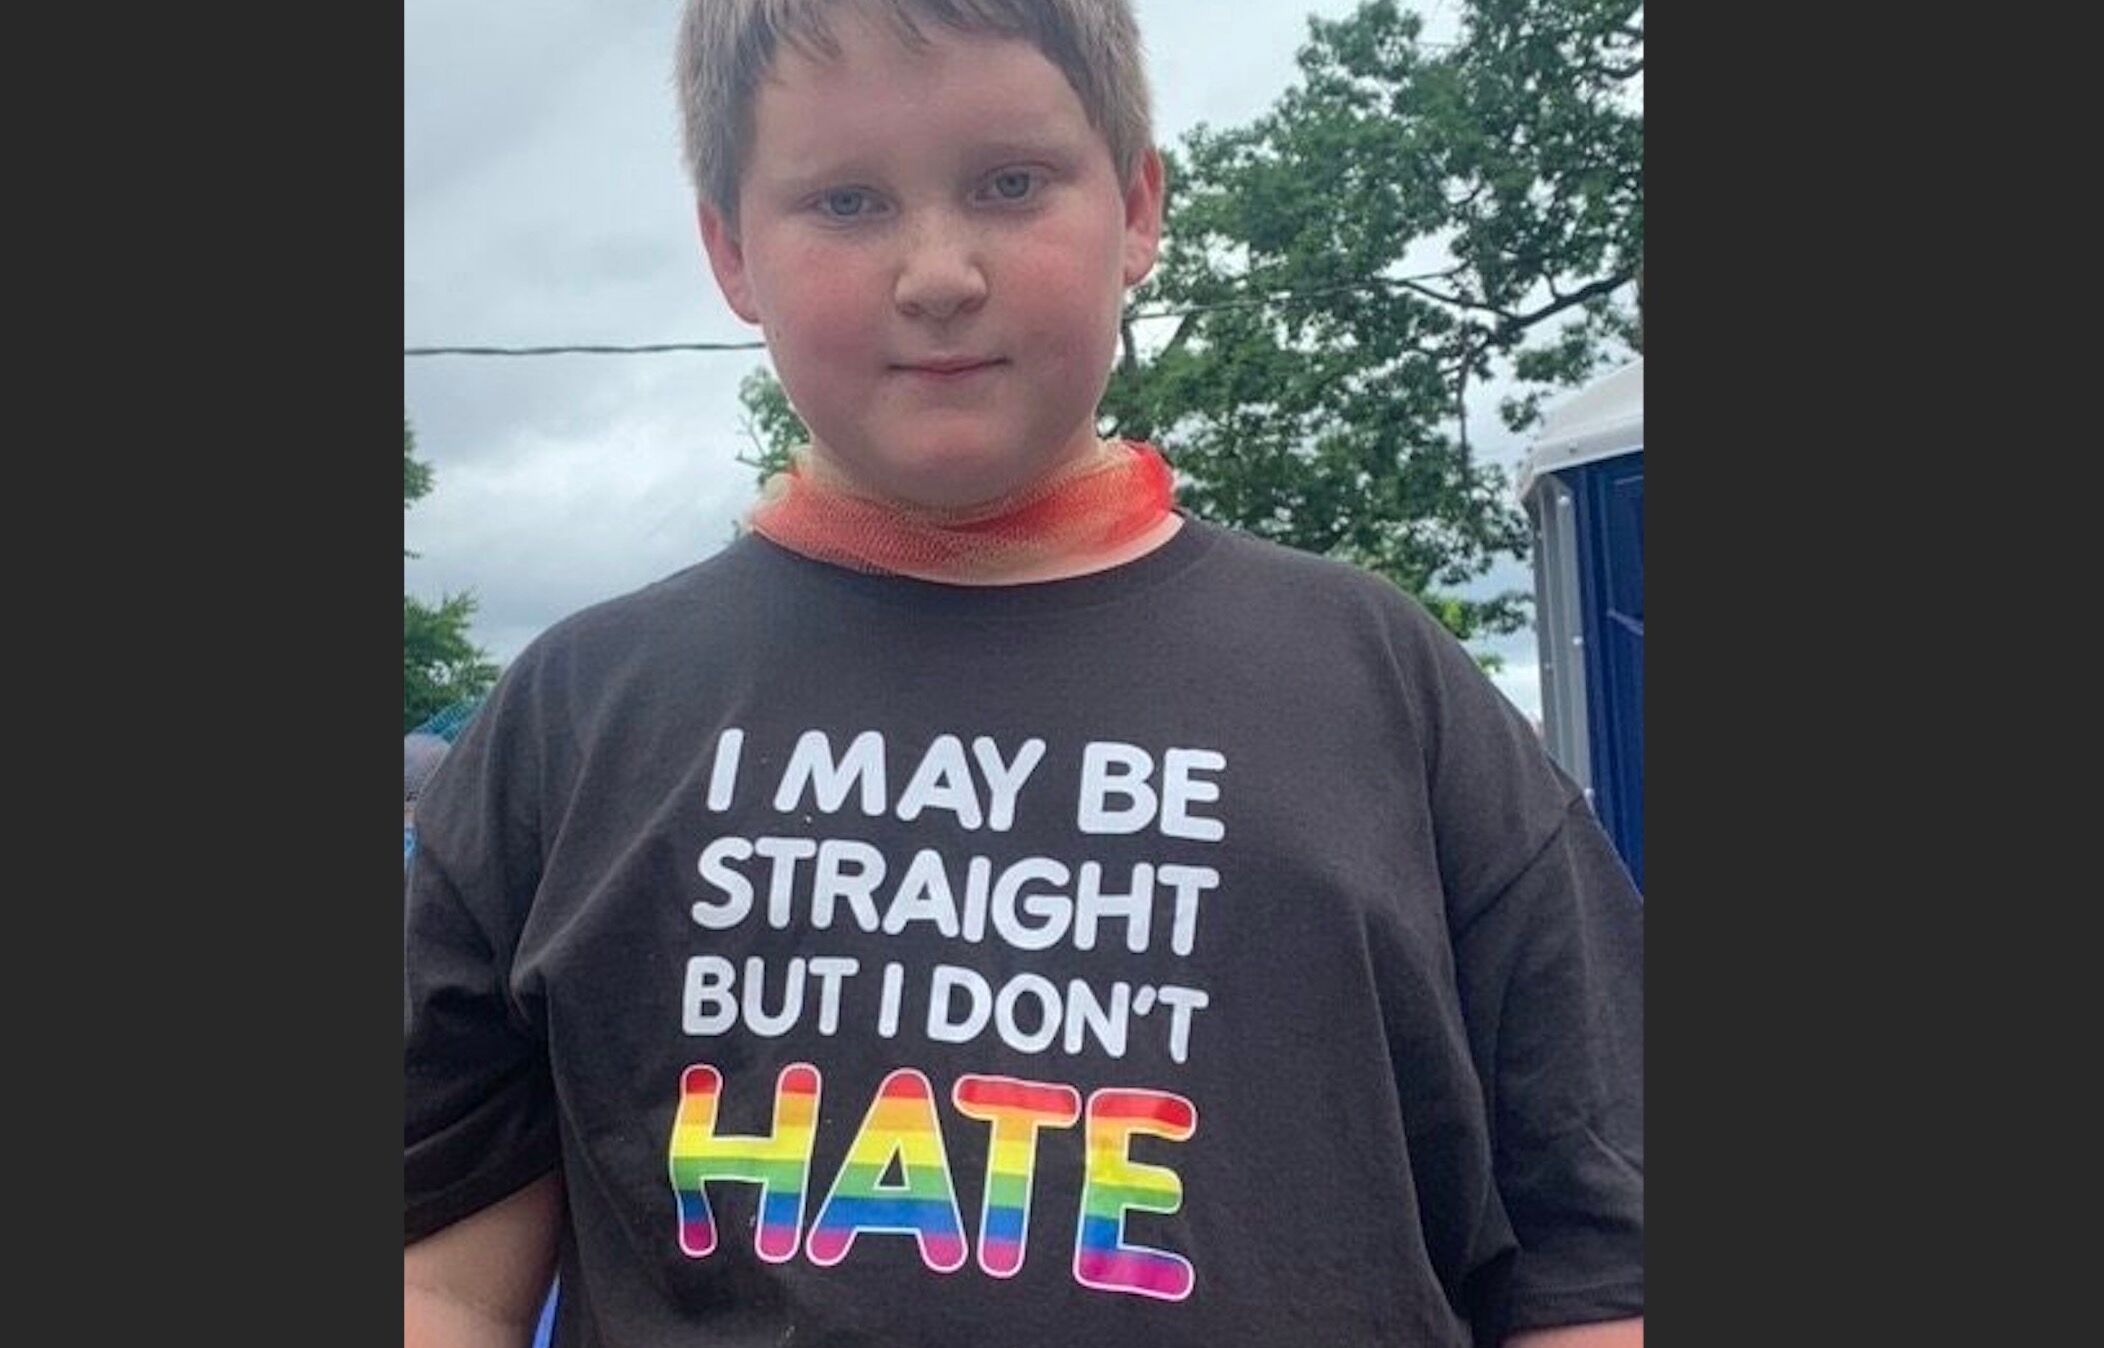 A teenaged parade-goer in Portland, Maine wears a t-shirt proclaiming, "I may be straight, but I don't hate."